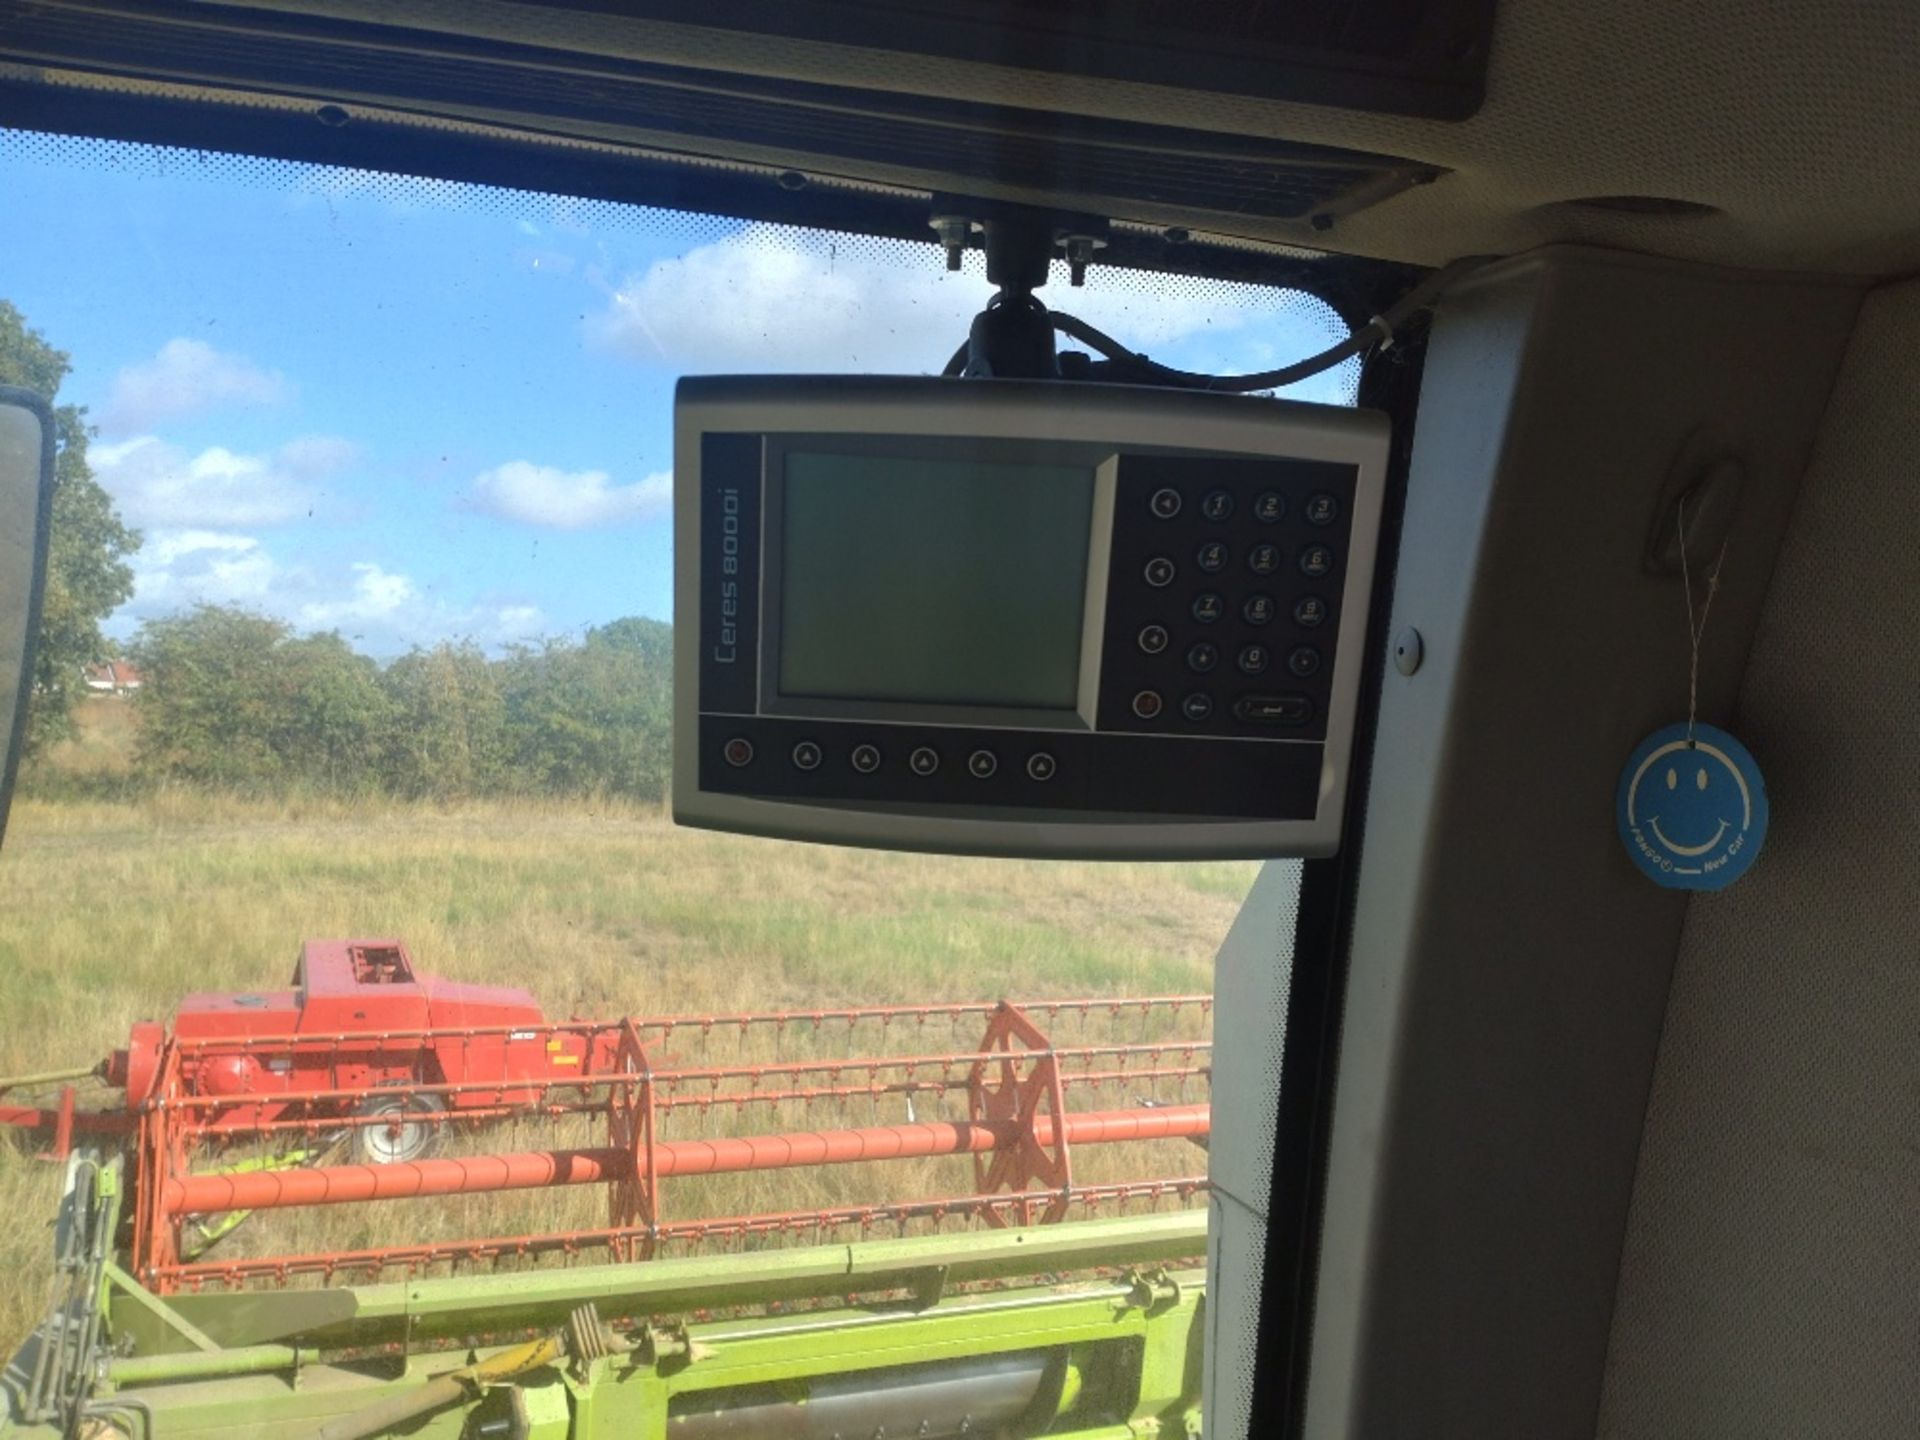 2009 Claas Avero 240 Combine with C490 Header, Reg: FX09 KUO, s/n 45100021,Ceres 800i Monitor, - Image 10 of 11